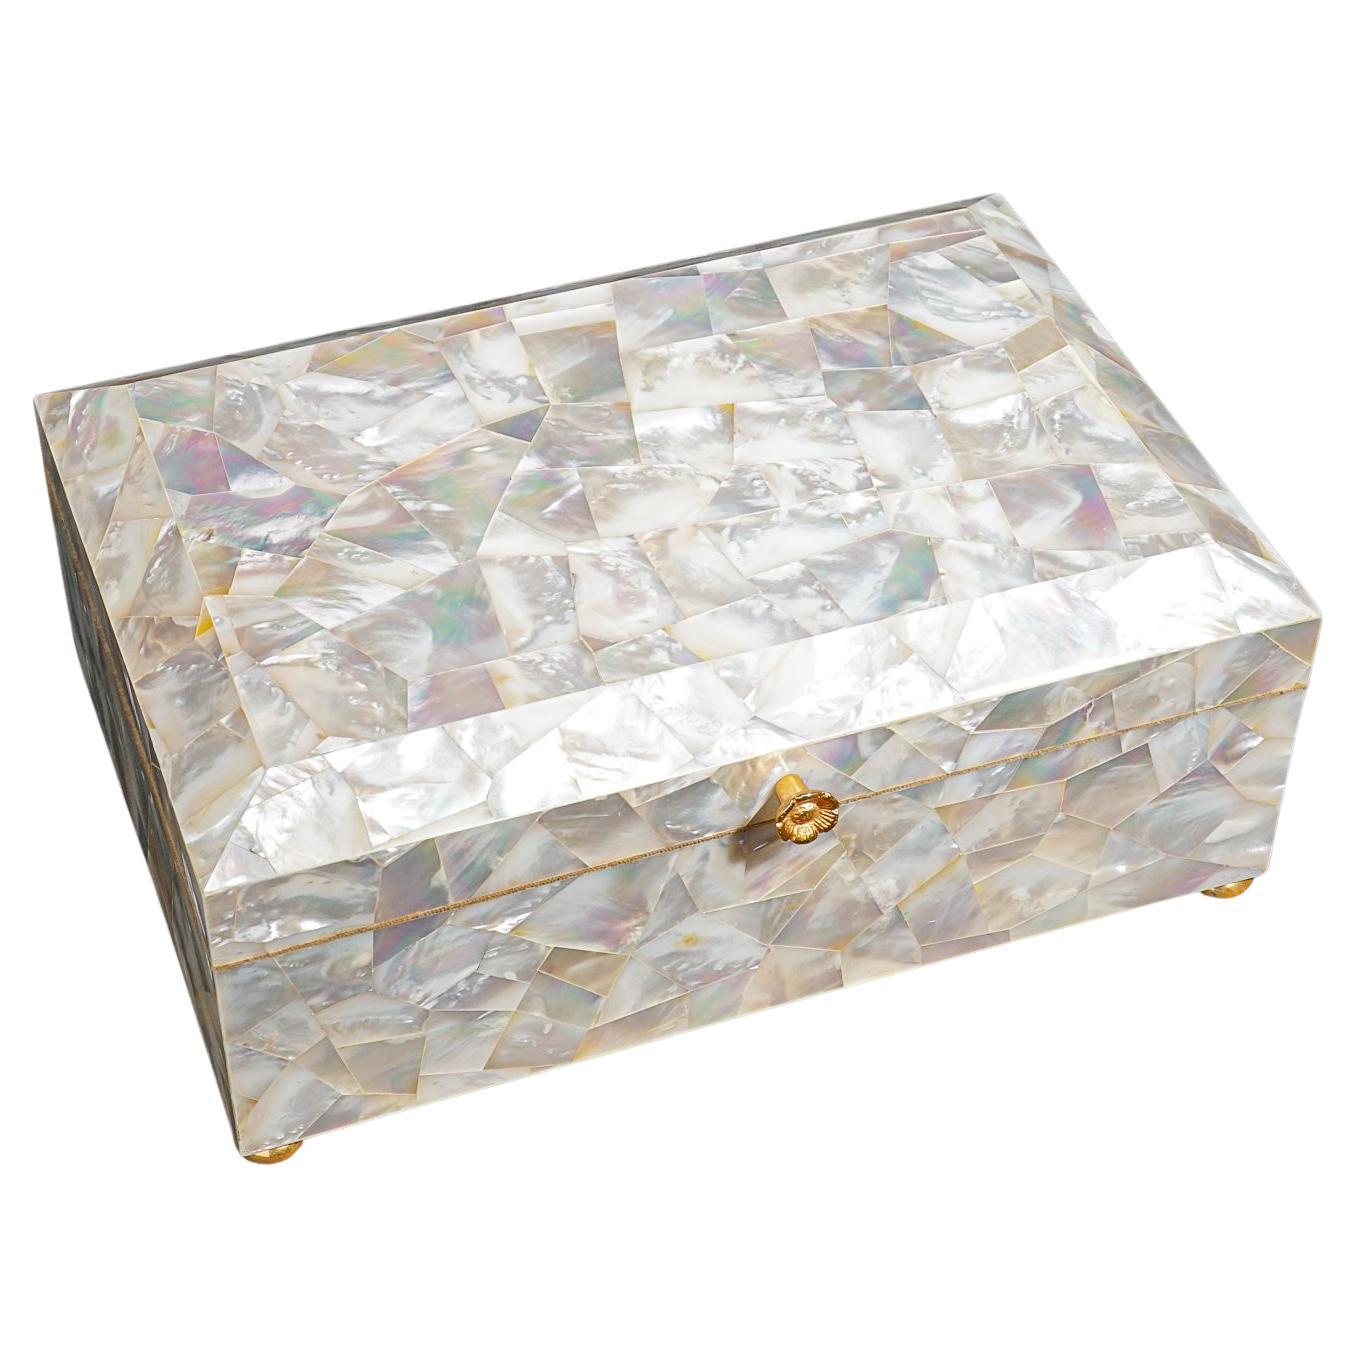 Genuine Large Mother of Pearl Decorative Jewelry Box (12" x 8.25" x 5", 9.5 lbs) For Sale